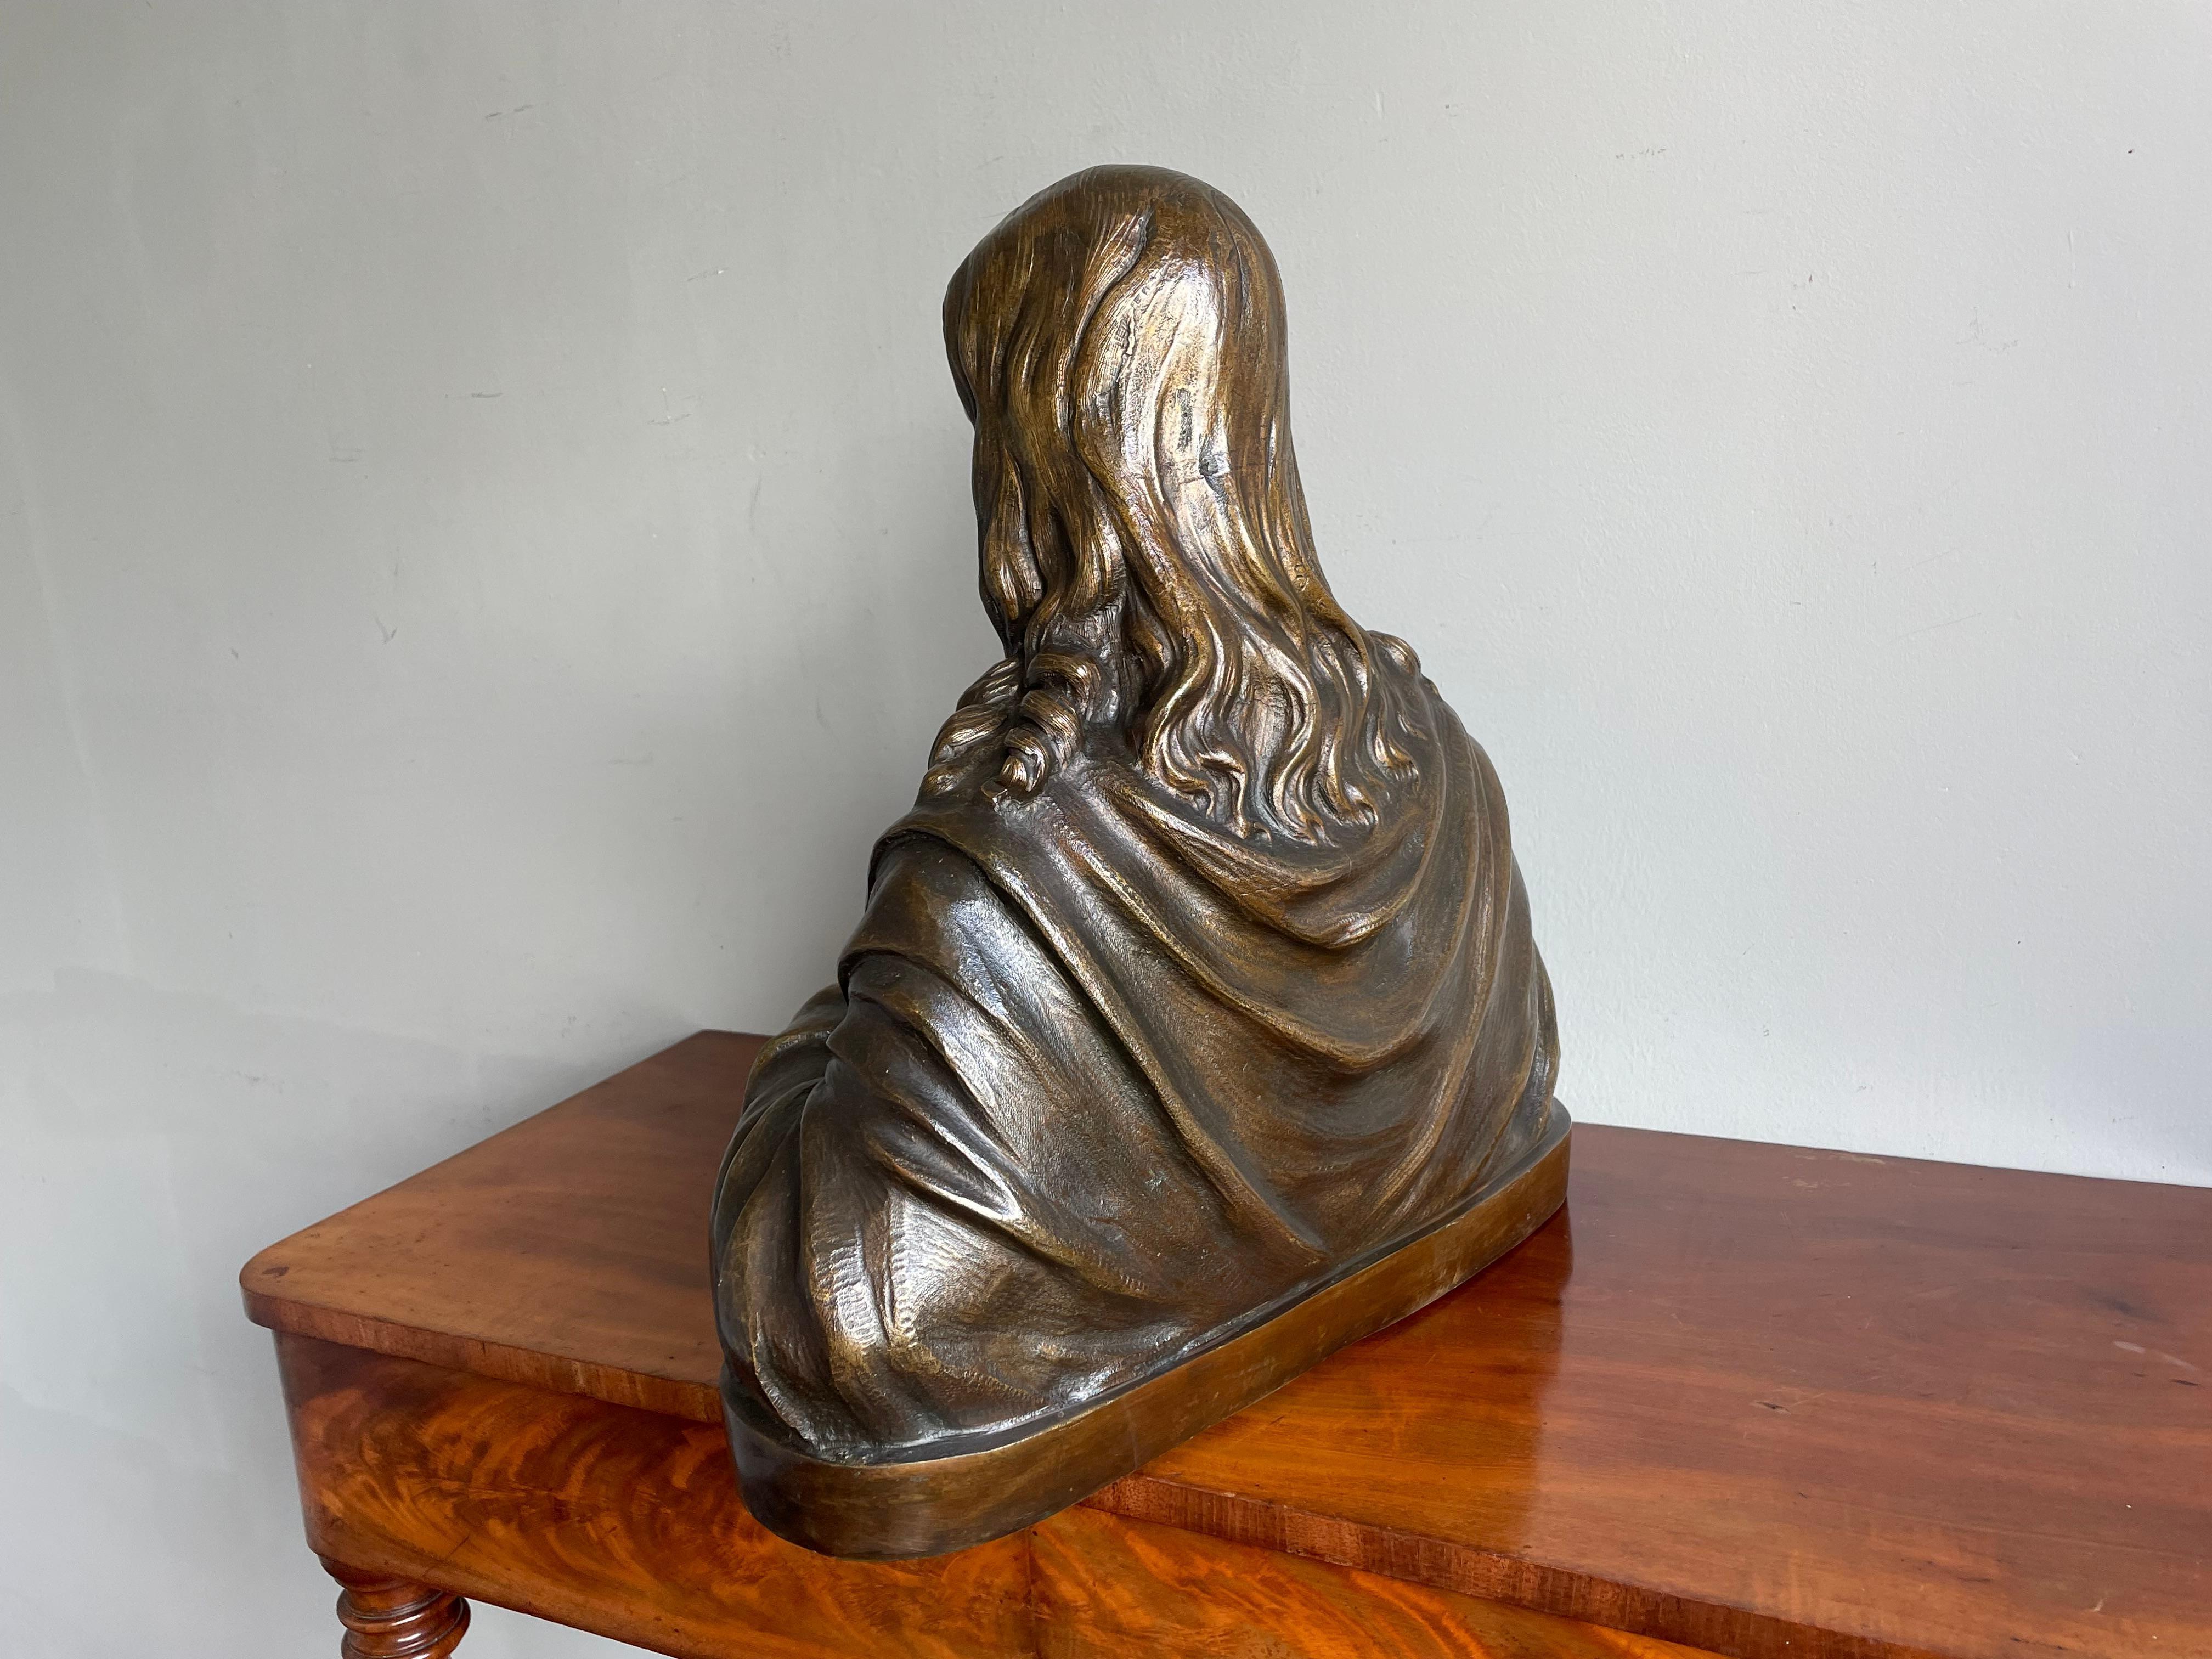 Rare Antique Bronze Holy Heart Sculpture / Bust of Our Lord Jesus Christ 1920 For Sale 6